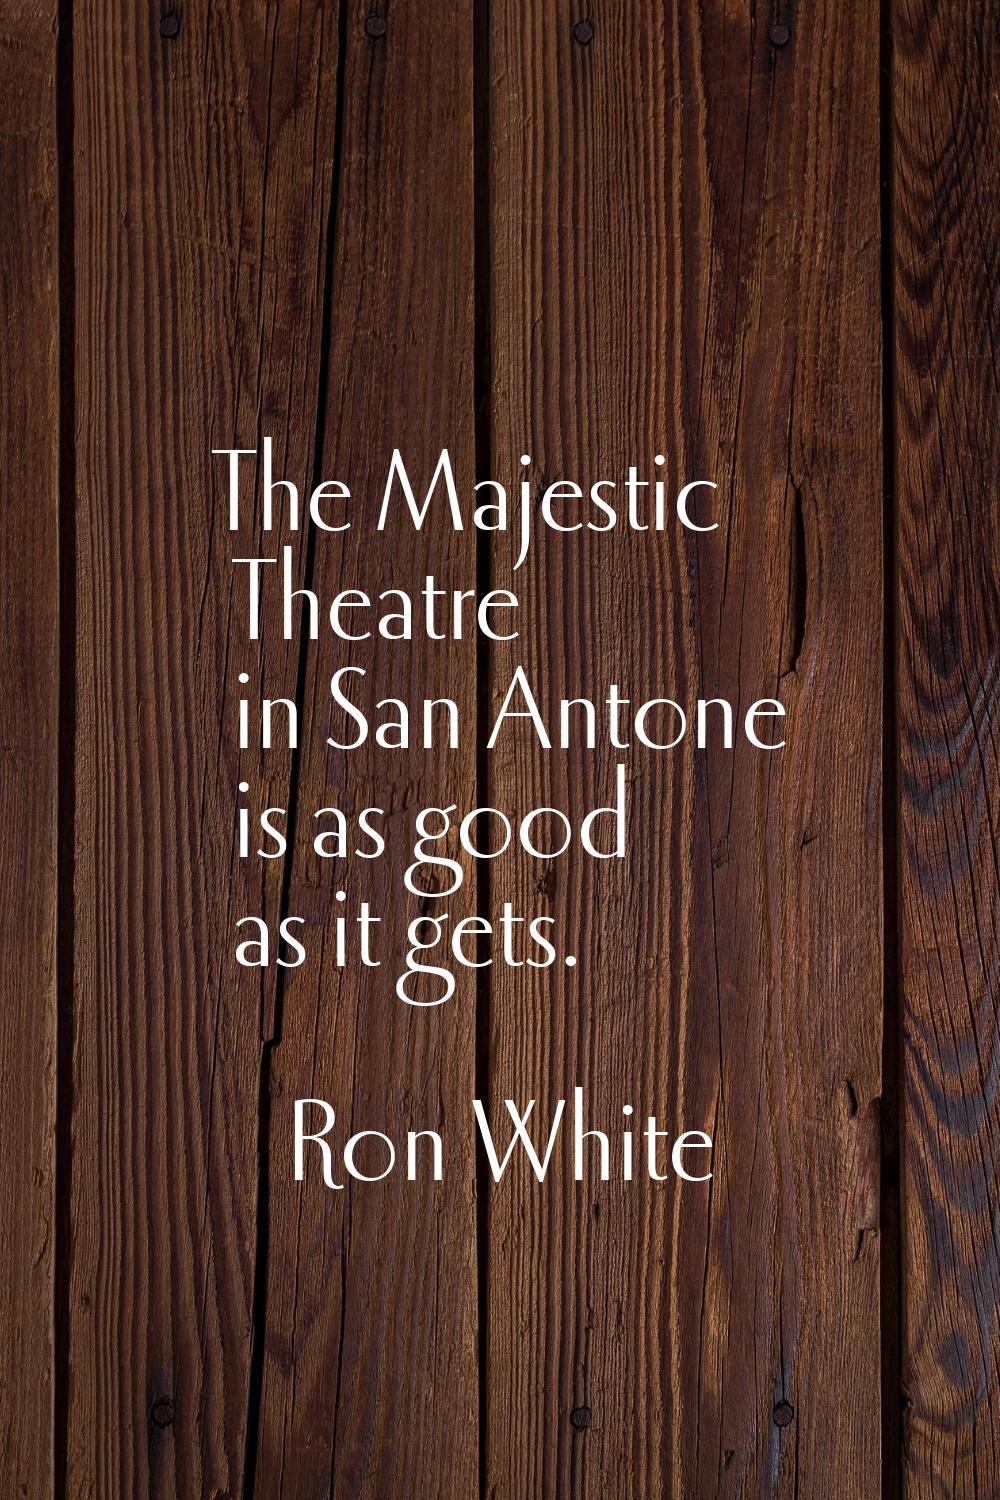 The Majestic Theatre in San Antone is as good as it gets.